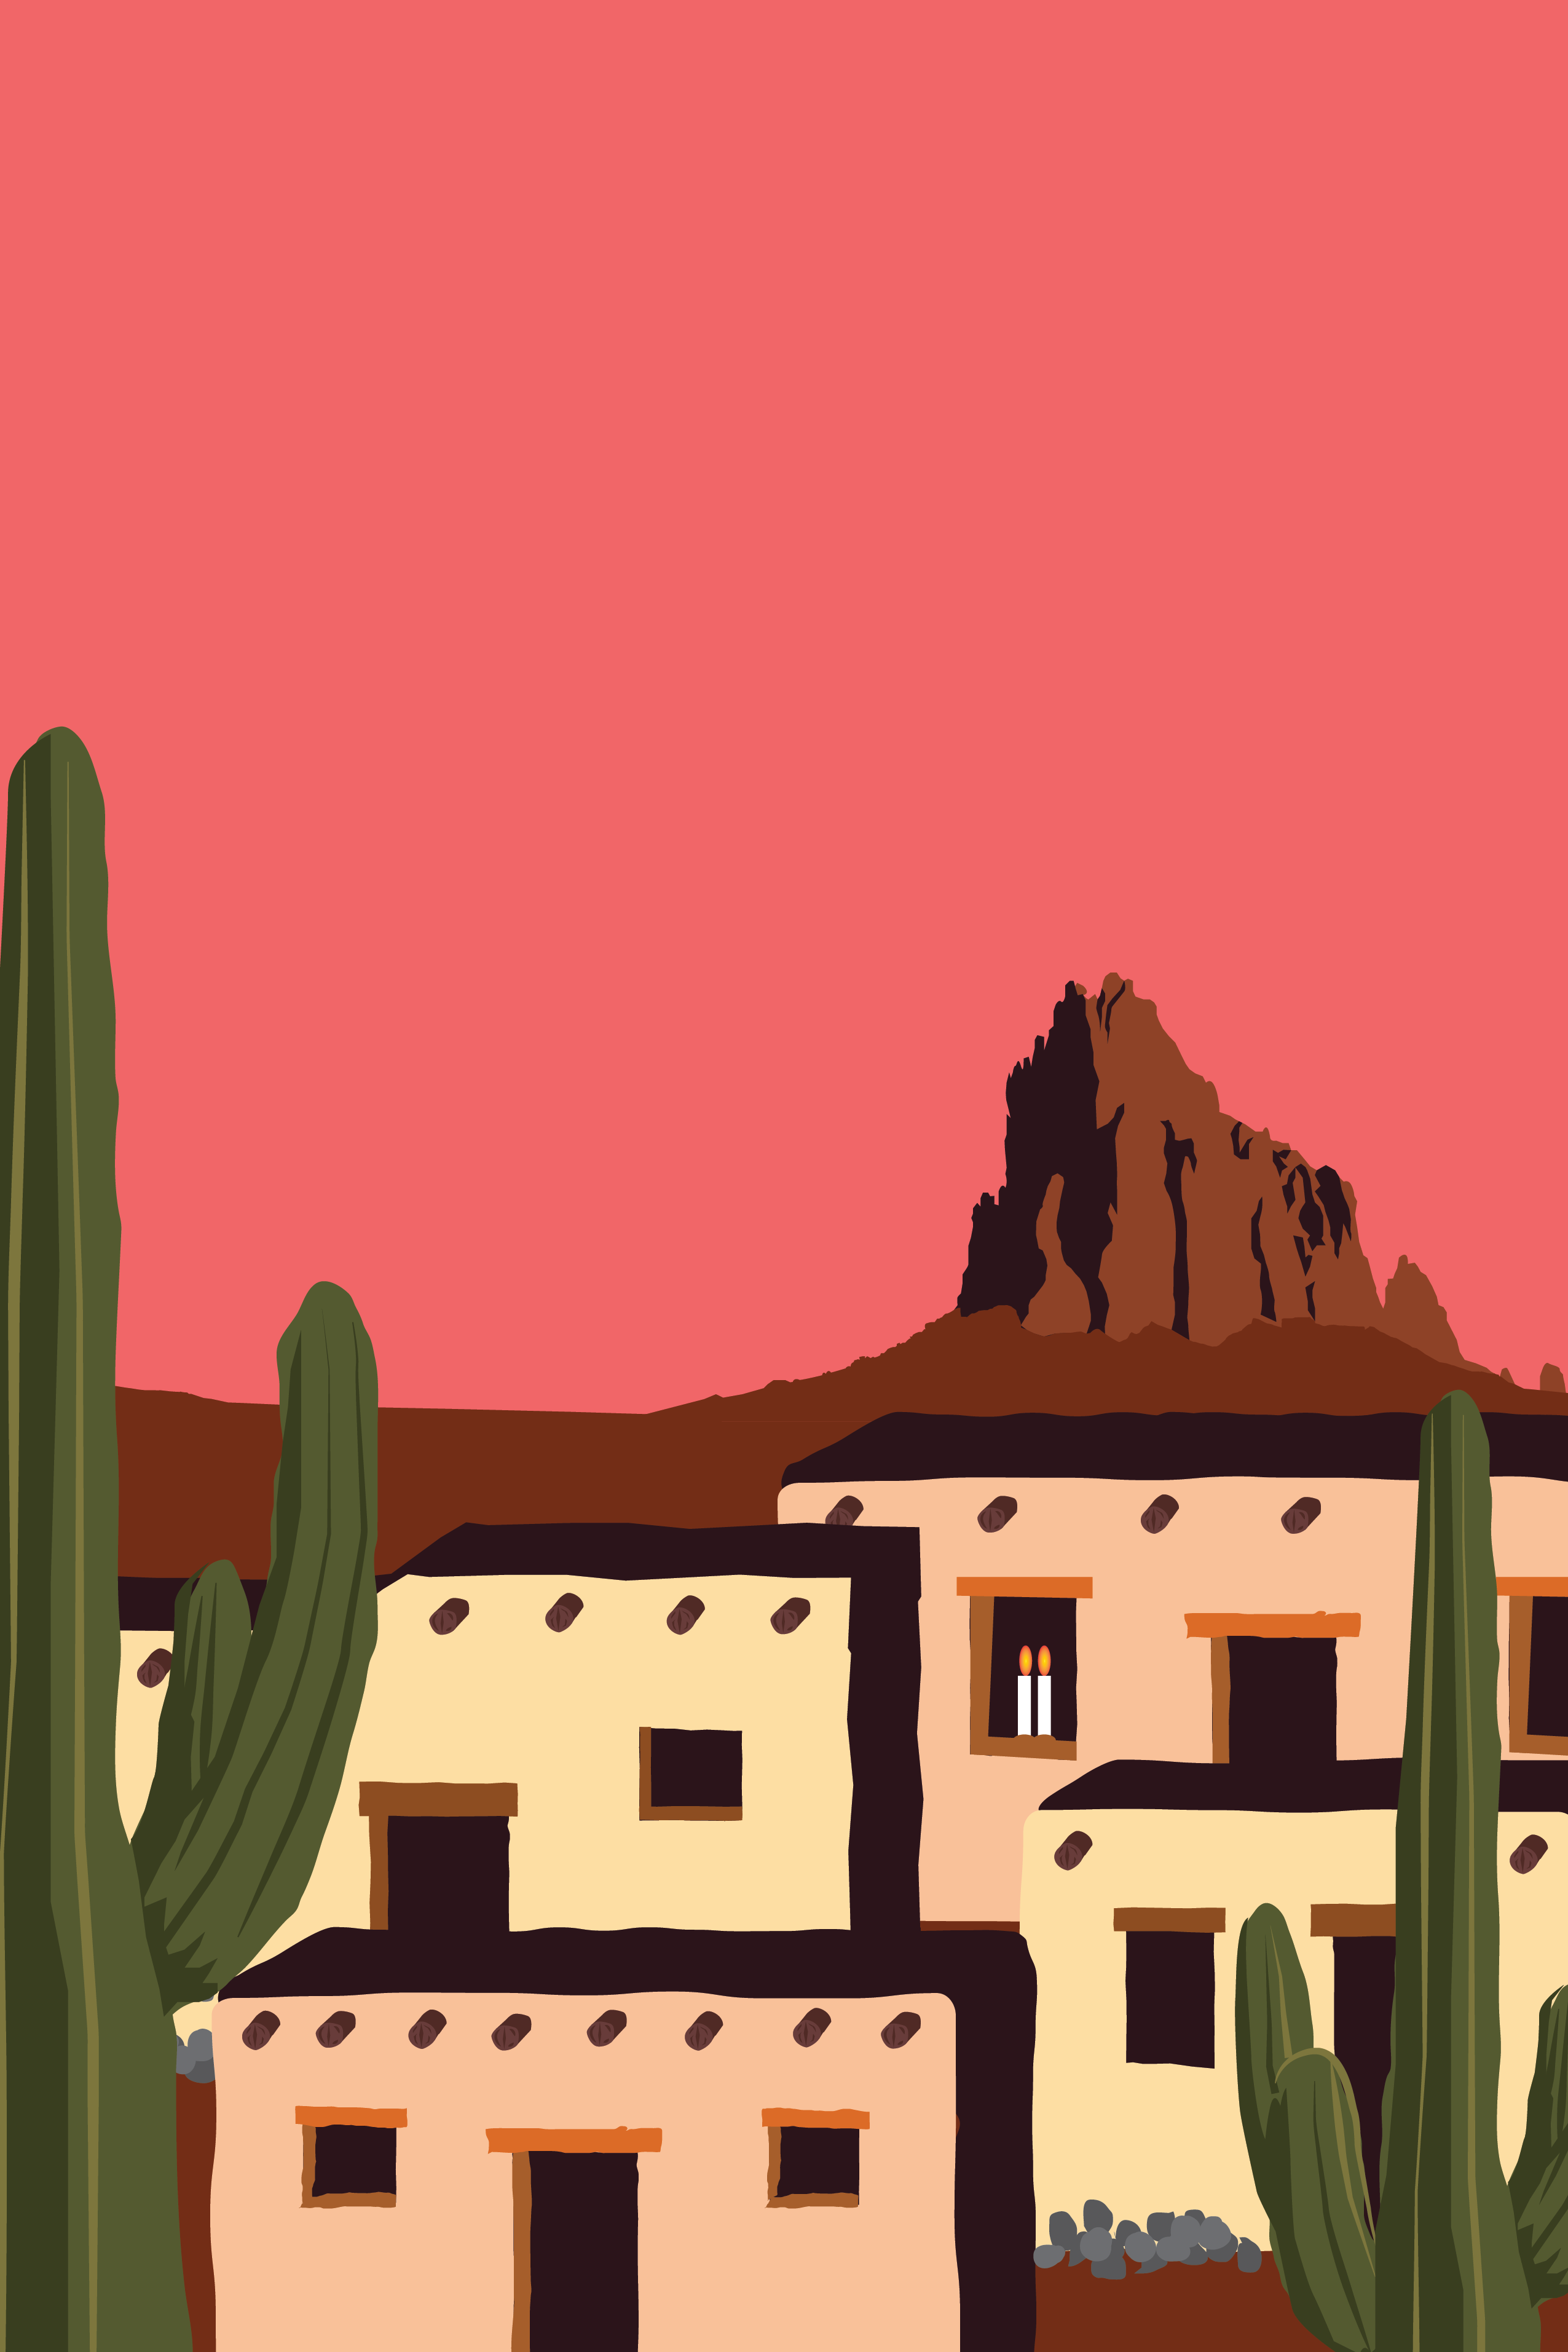 An illustration of adobe houses and cactuses in front of Western mountain ranges.